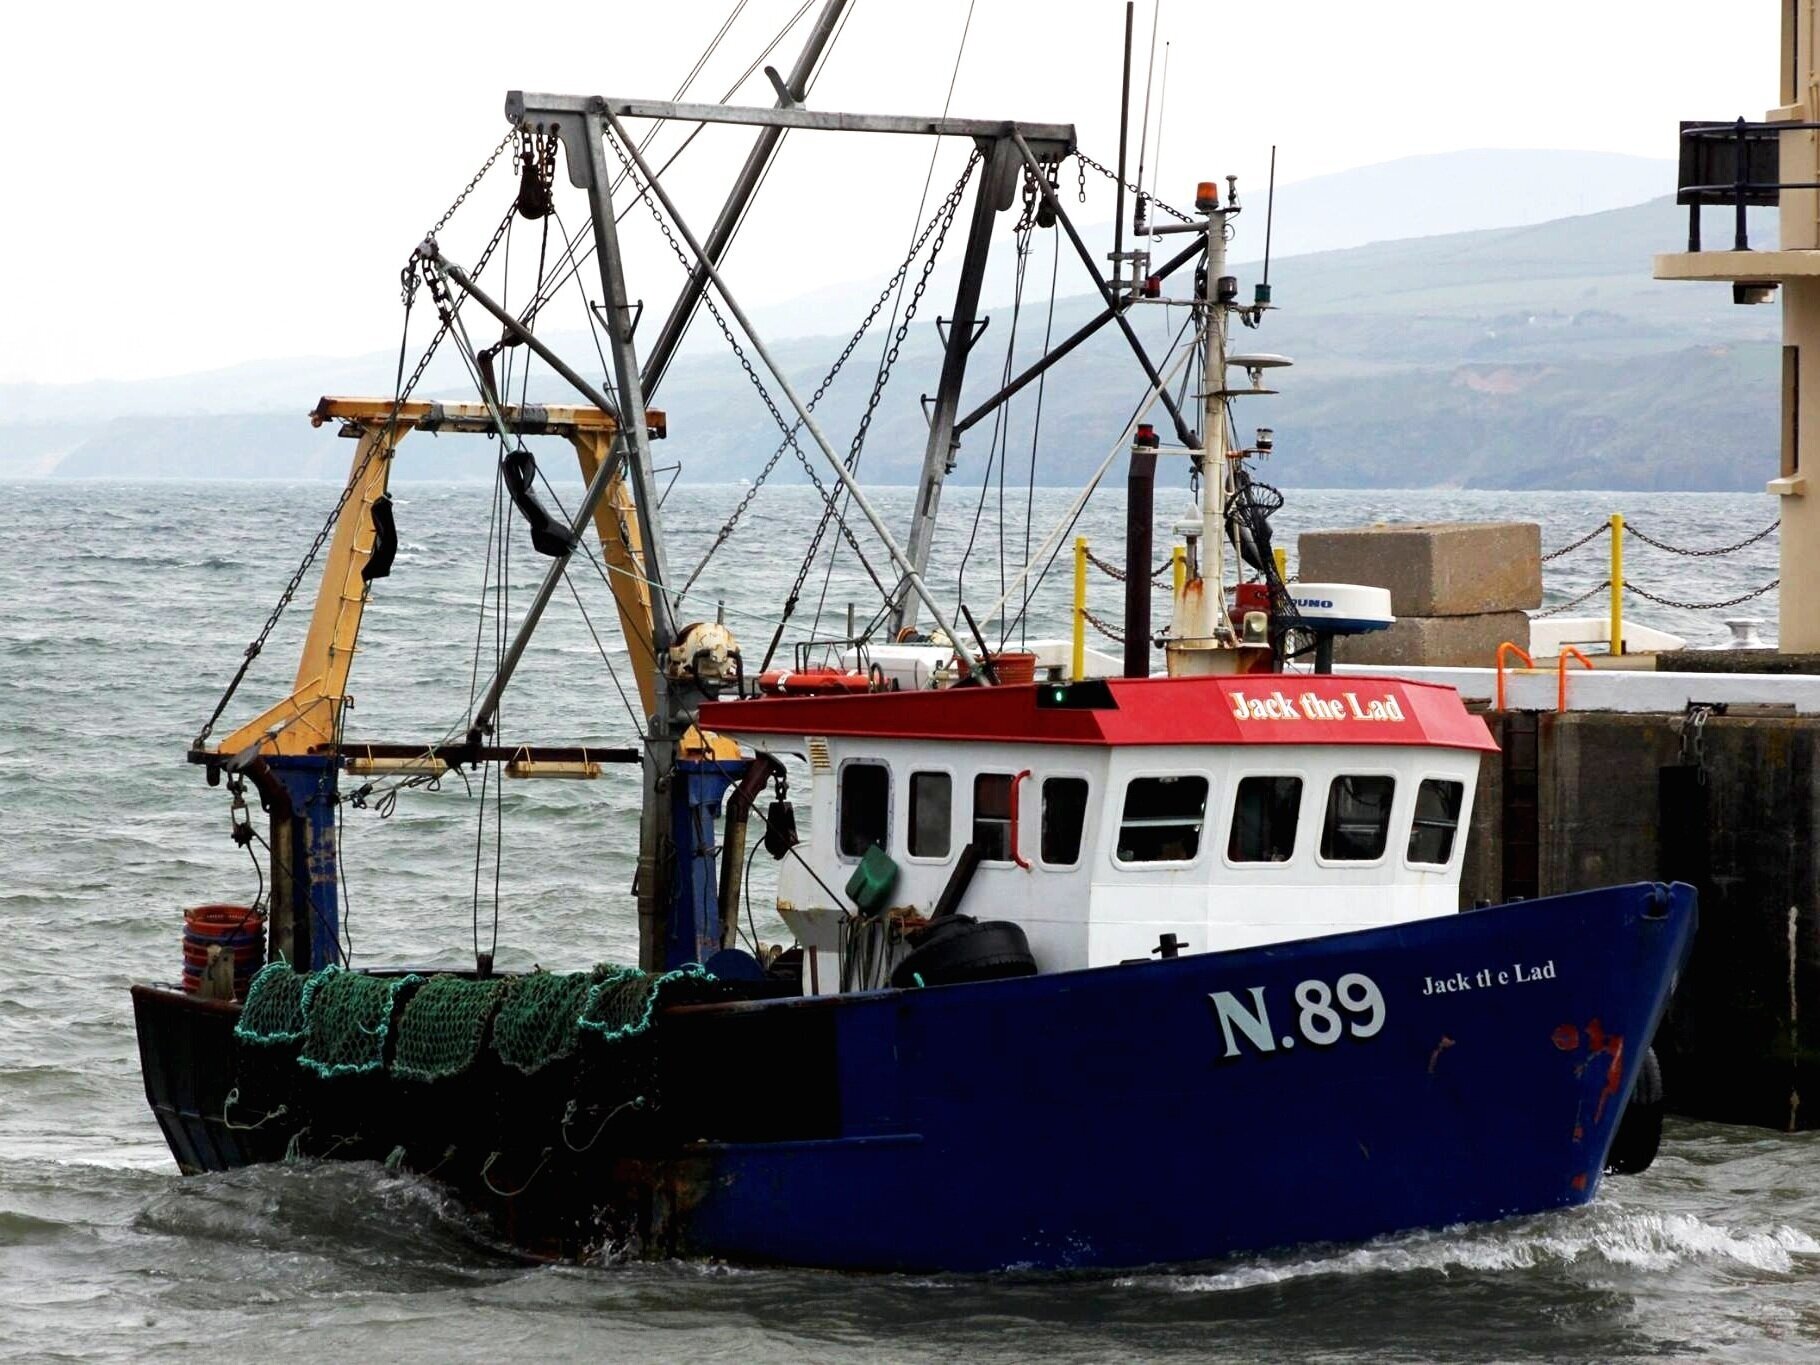 JACK THE LAD N89Tipo: Metal Hull TrawlerSize: 9.9mBuilt: 1991; Isola di Wight